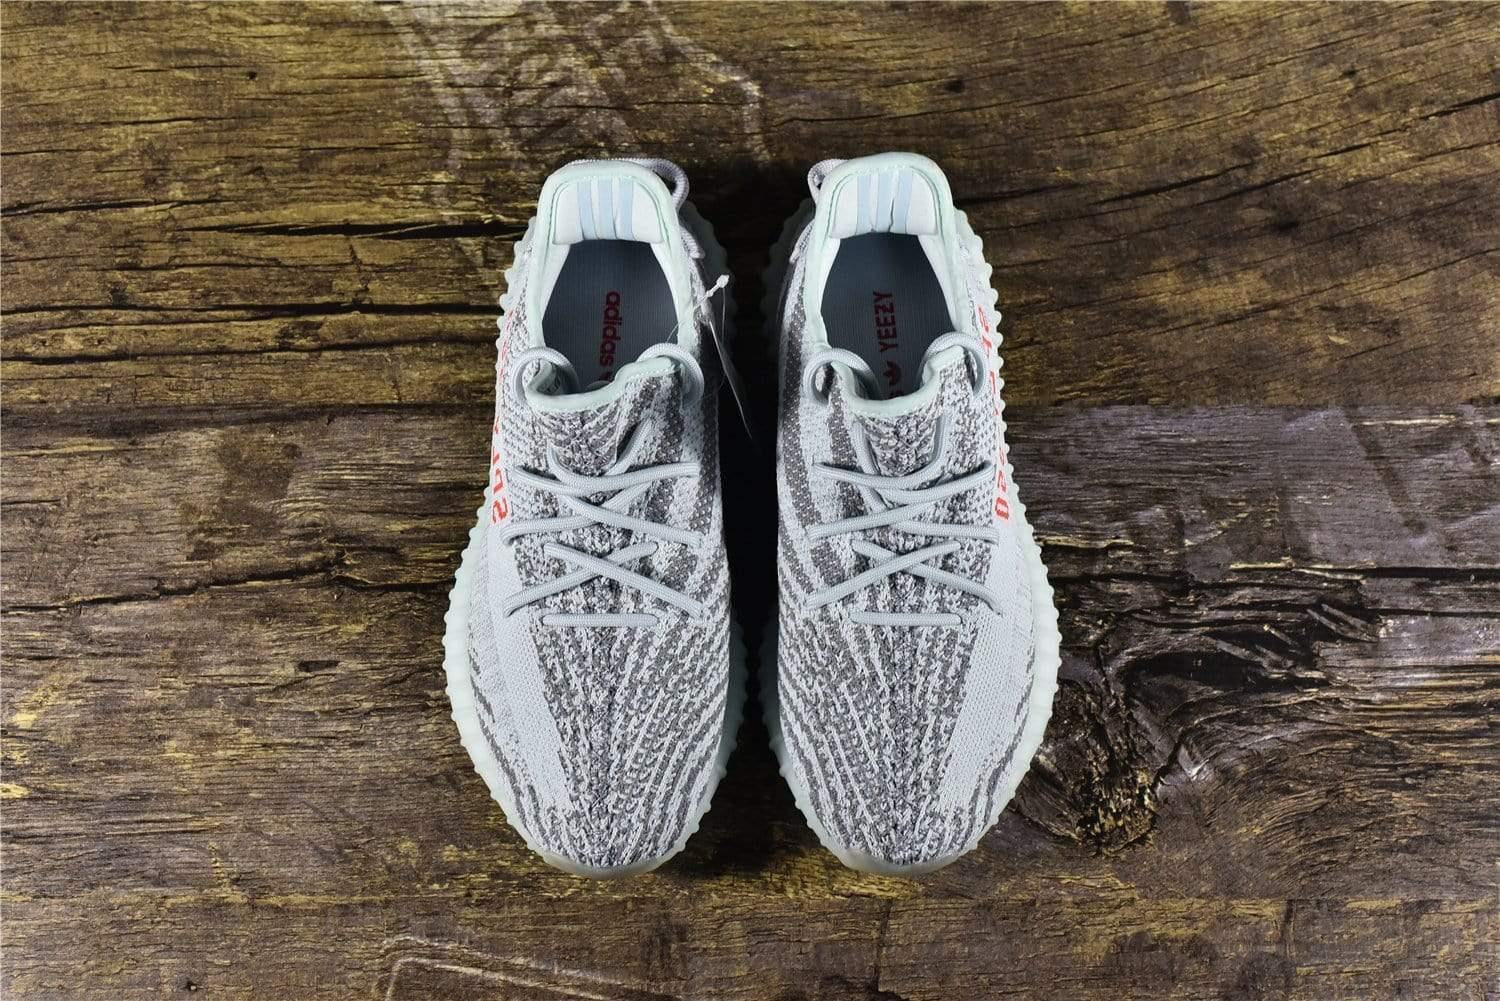 US$ 120.00 - adidas Yeezy Boost 350 V2 Blue Tint - Chan Sneakers Review